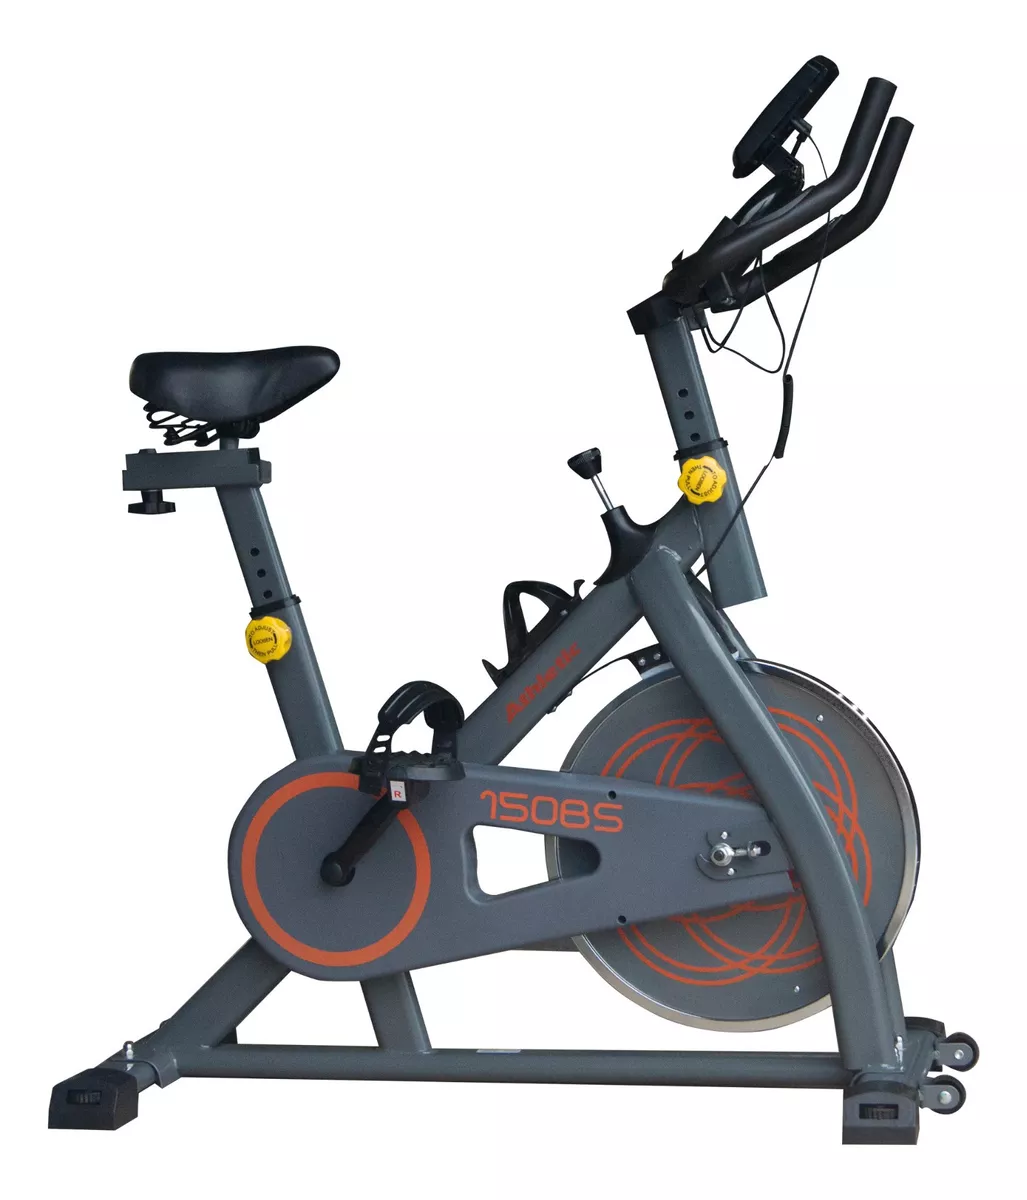 Bicicleta Spinning Athletic Advanced 150bs Suporta 120kg